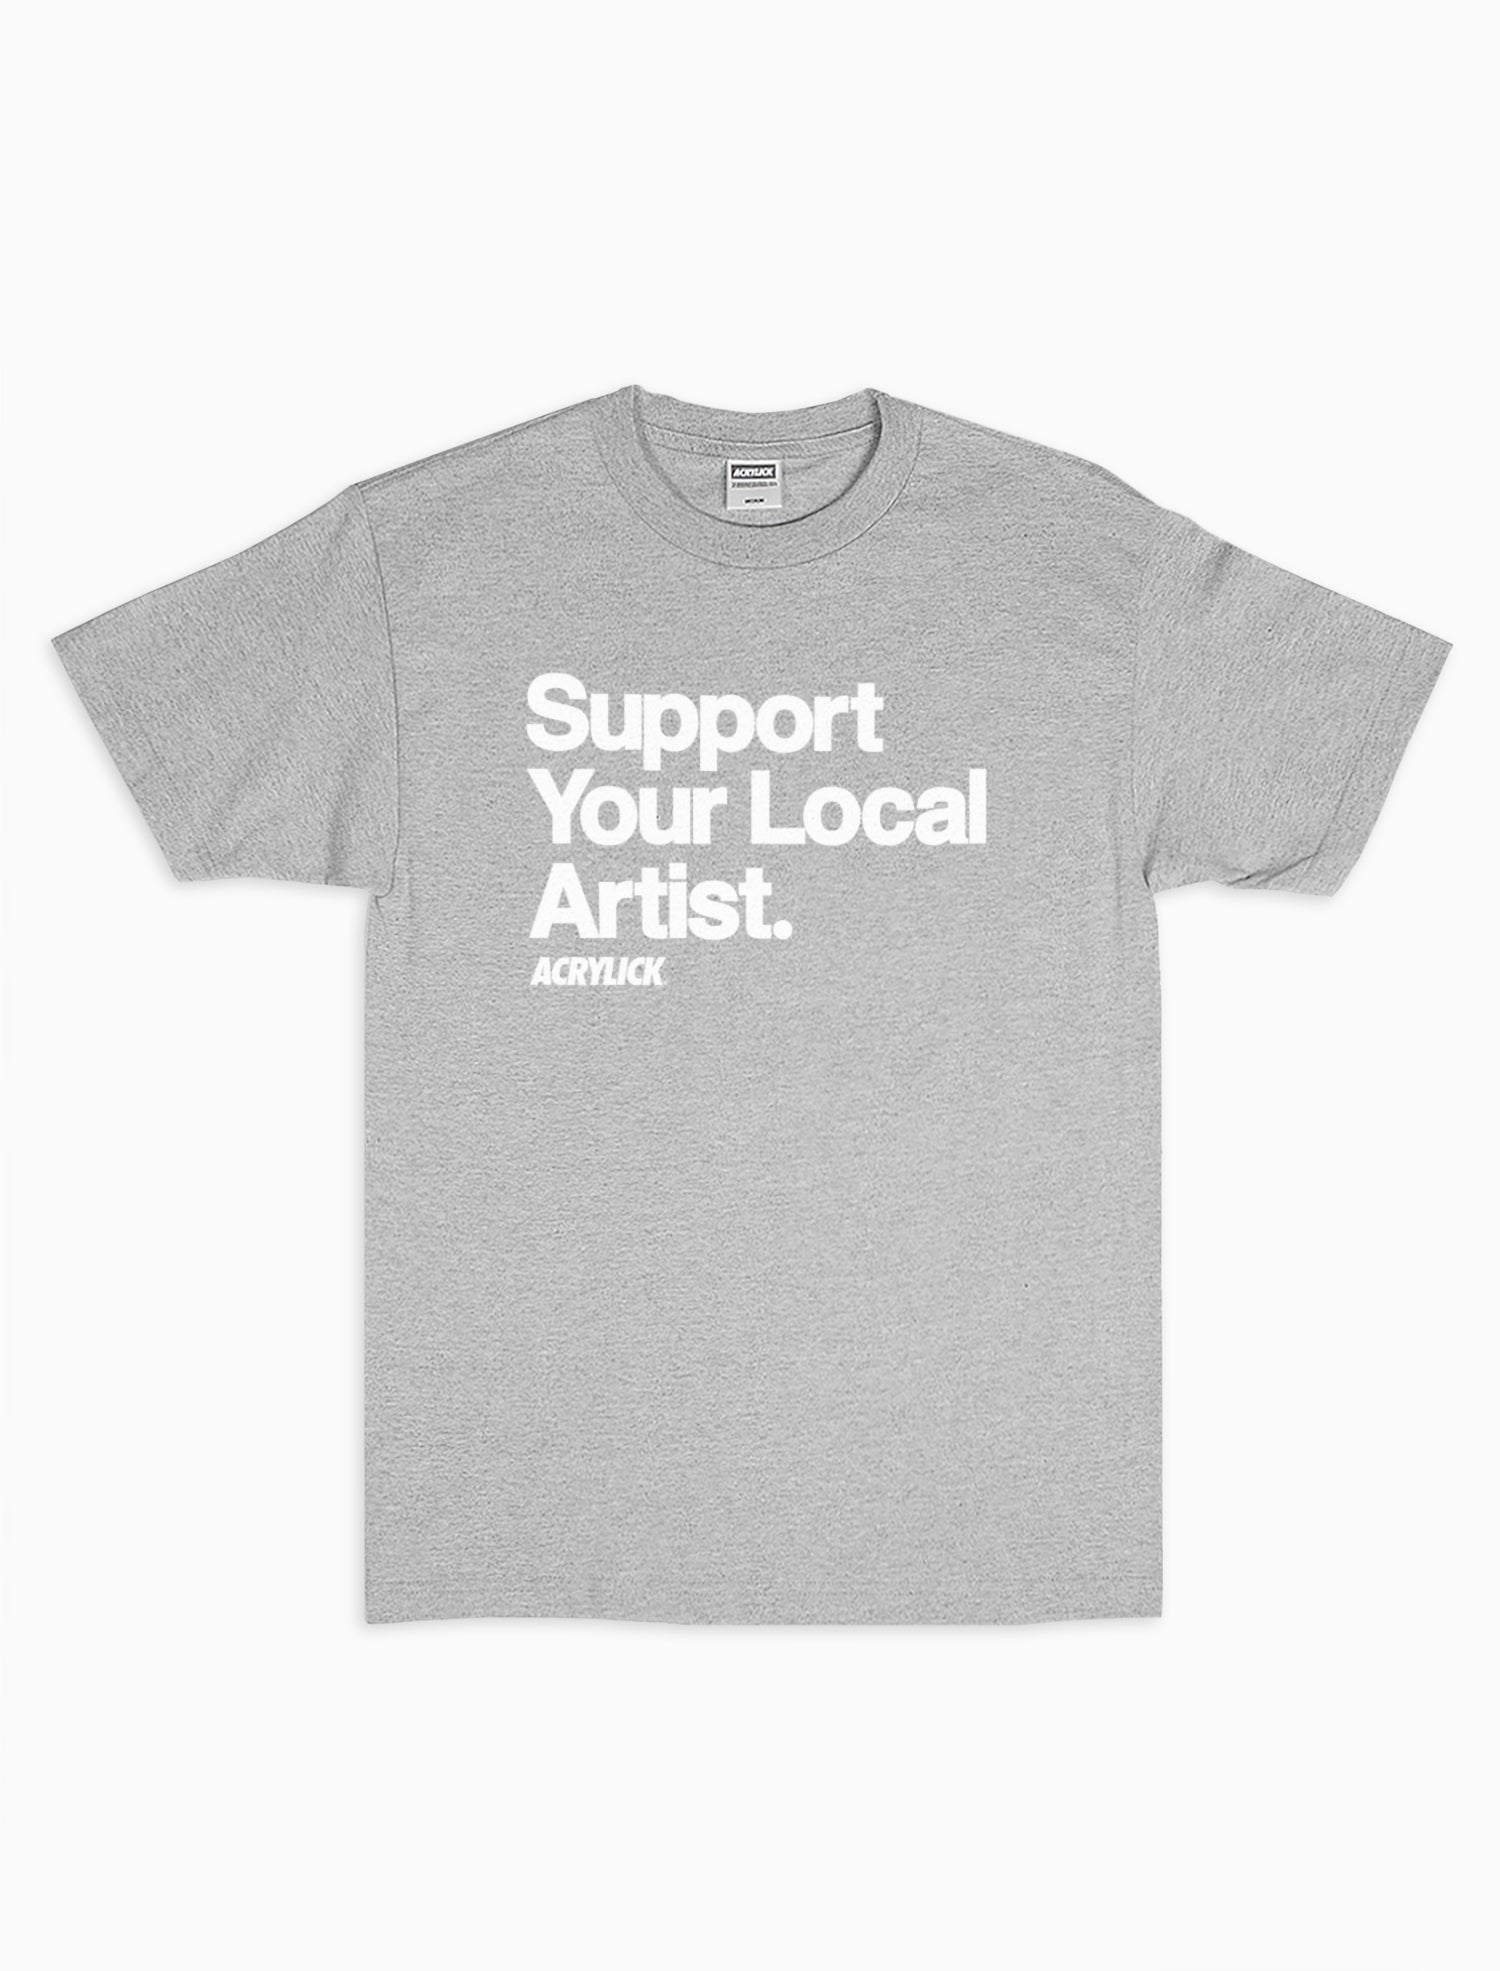 Acrylick Goods - Support Your Local Artist Tee - Available in Heather Grey and Navy Tees